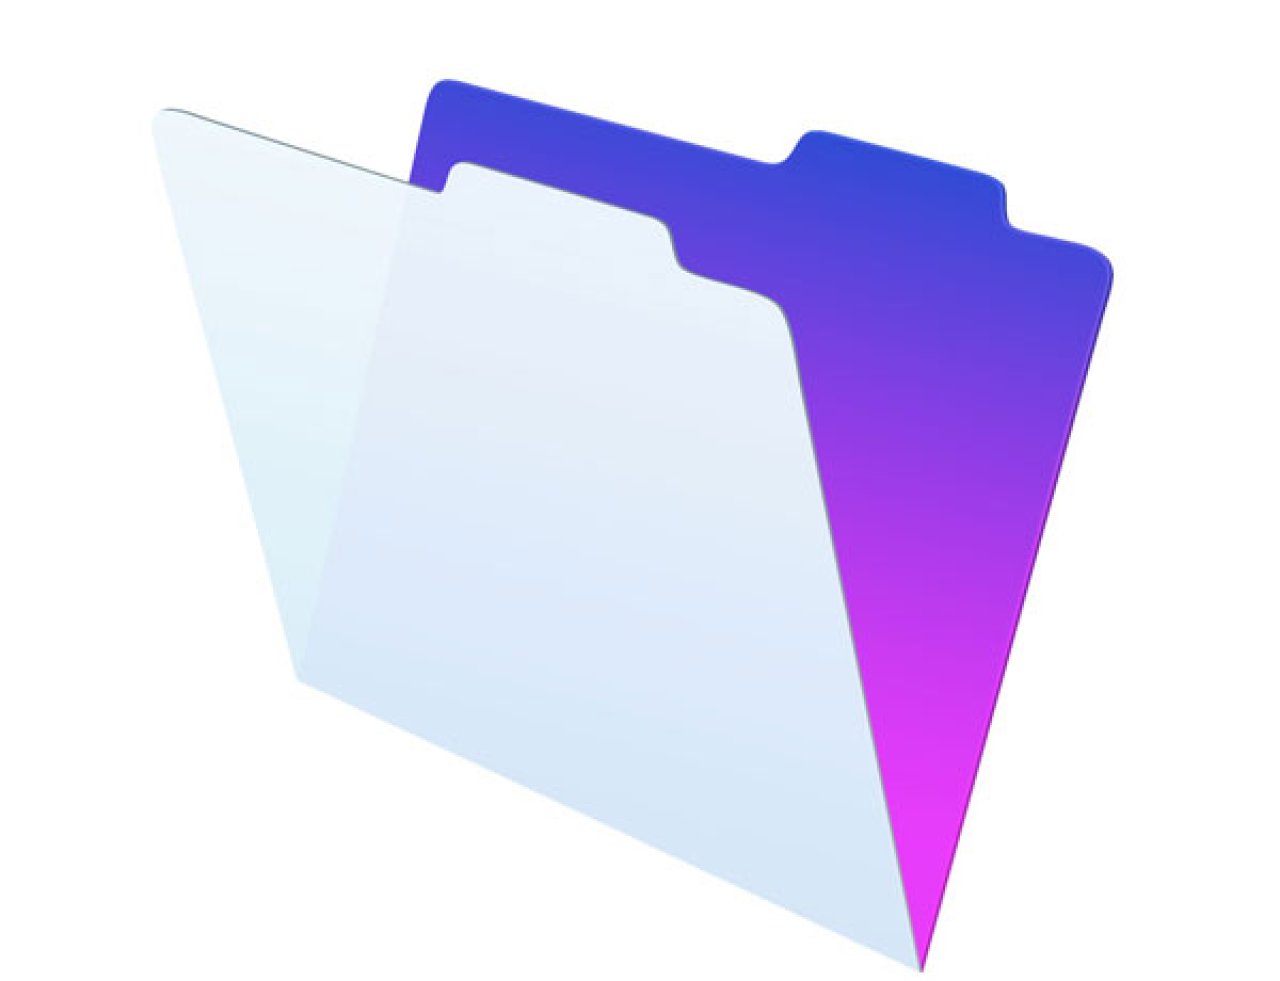 filemaker pro 15 icon.